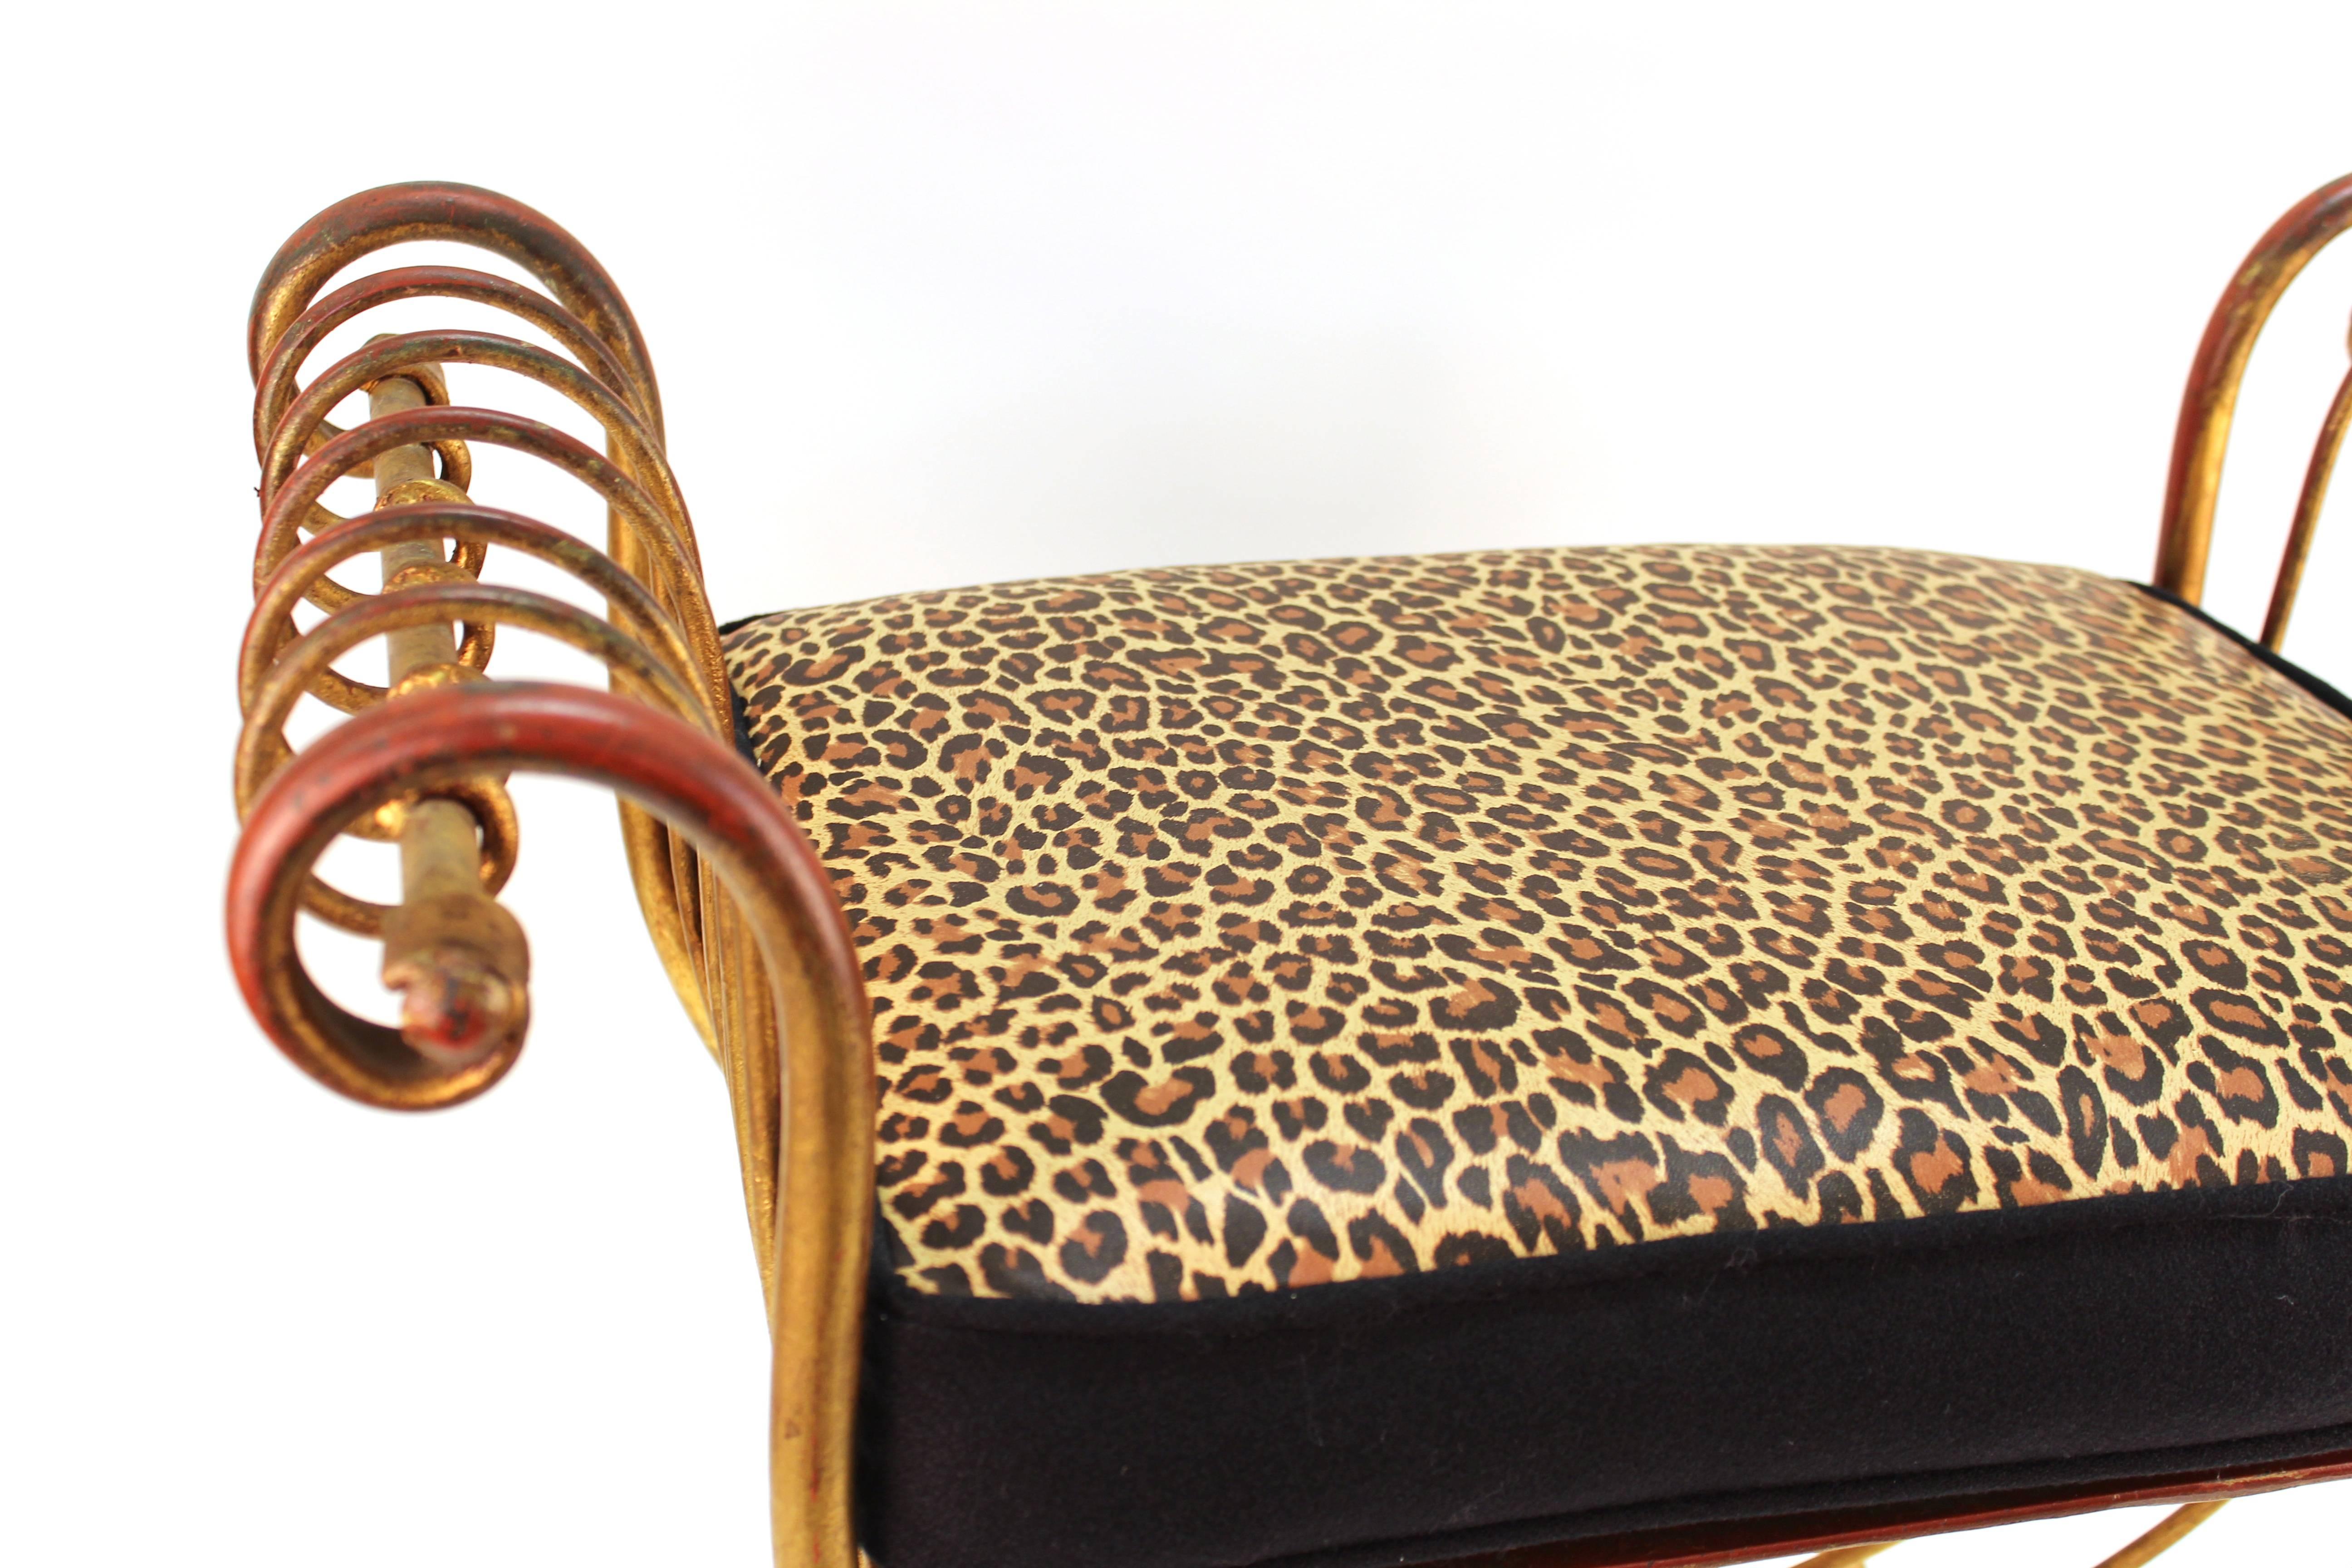 Hollywood Regency Italian Gilded Wrought Iron Benches in Leopard Print Leather 1